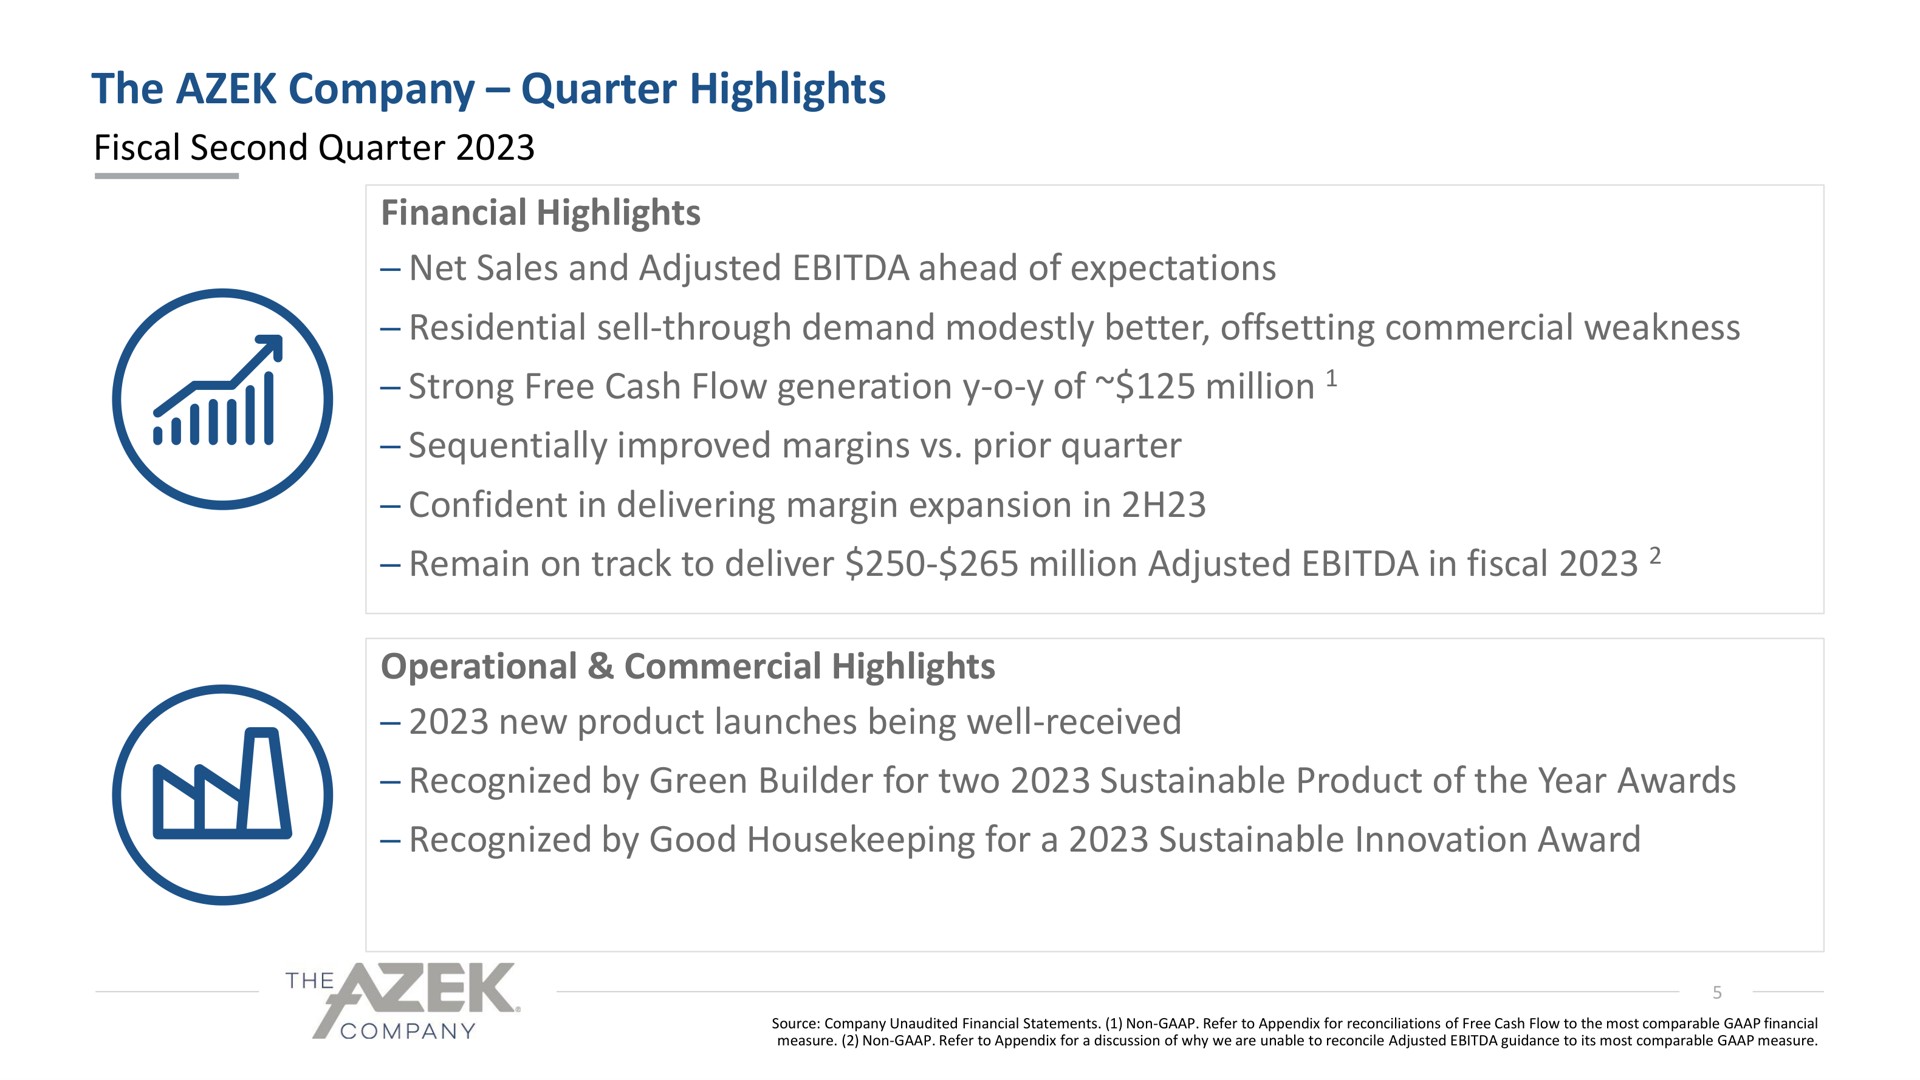 the company quarter highlights fiscal second quarter financial highlights net sales and adjusted ahead of expectations residential sell through demand modestly better offsetting commercial weakness strong free cash flow generation of million sequentially improved margins prior quarter confident in delivering margin expansion in remain on track to deliver million adjusted in fiscal operational commercial highlights new product launches being well received recognized by green builder for two sustainable product of the year awards recognized by good housekeeping for a sustainable innovation award | Azek